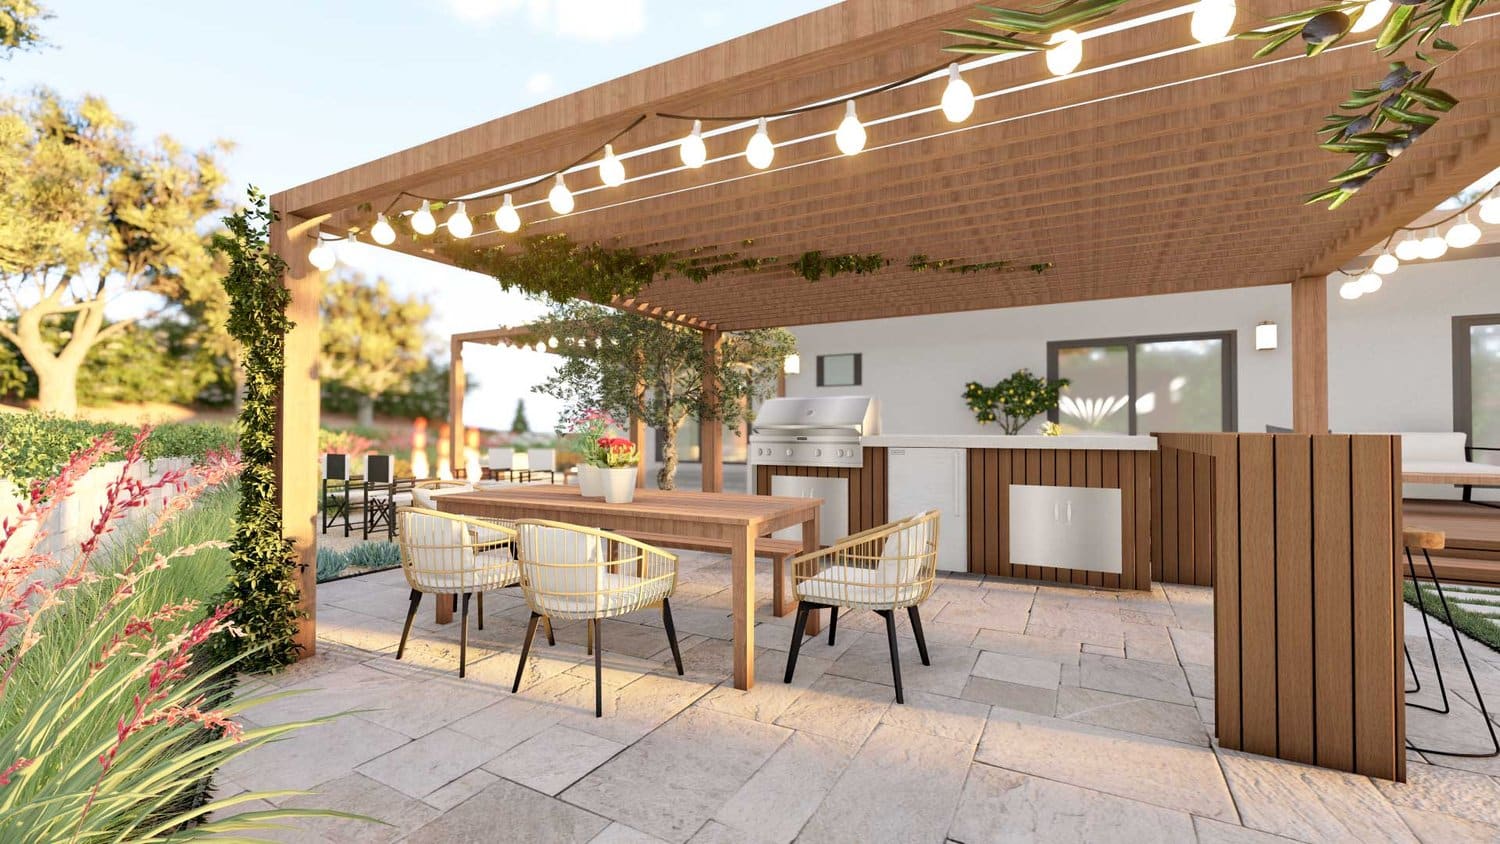 Thousand Oaks paver concrete patio with pergola over dining seat and outdoor kitchen